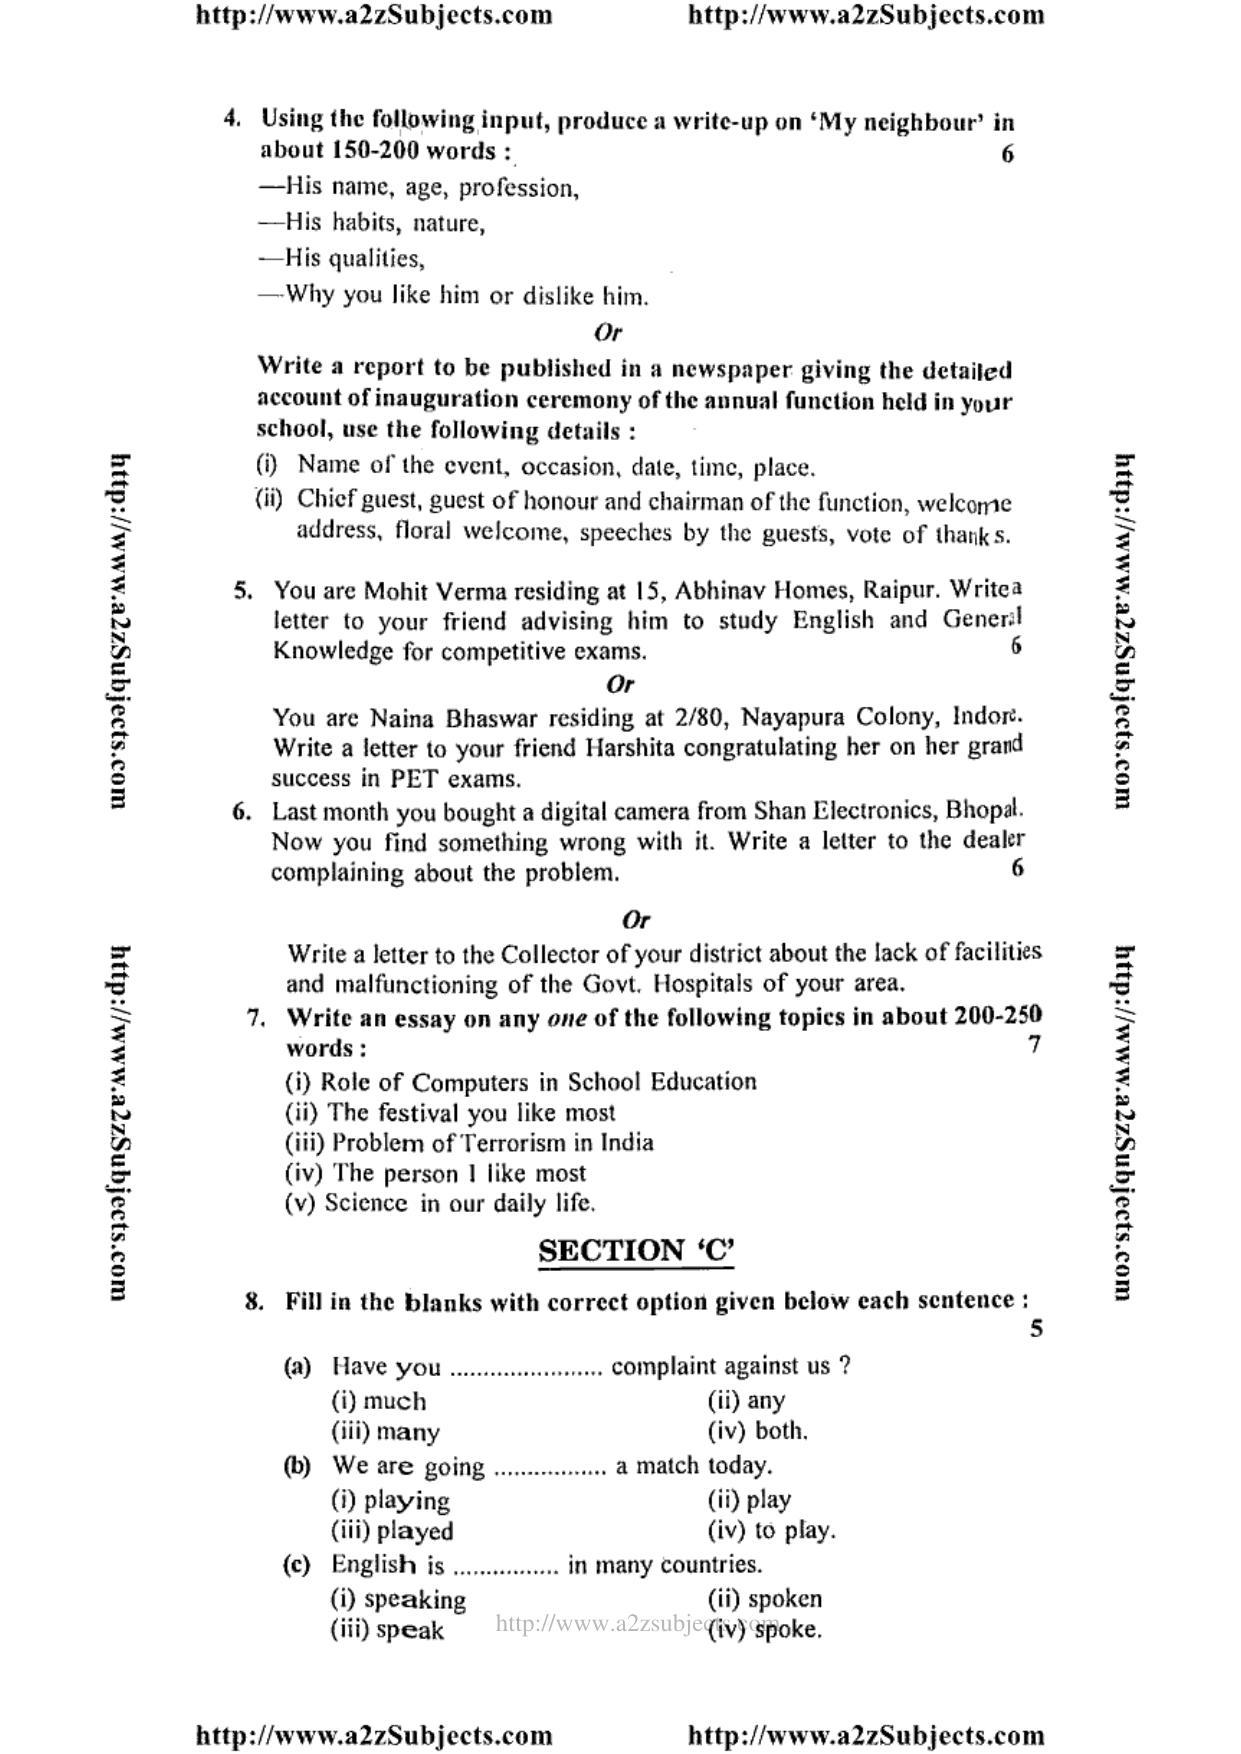 MP Board Class 12 English General 2014 Question Paper - Page 3